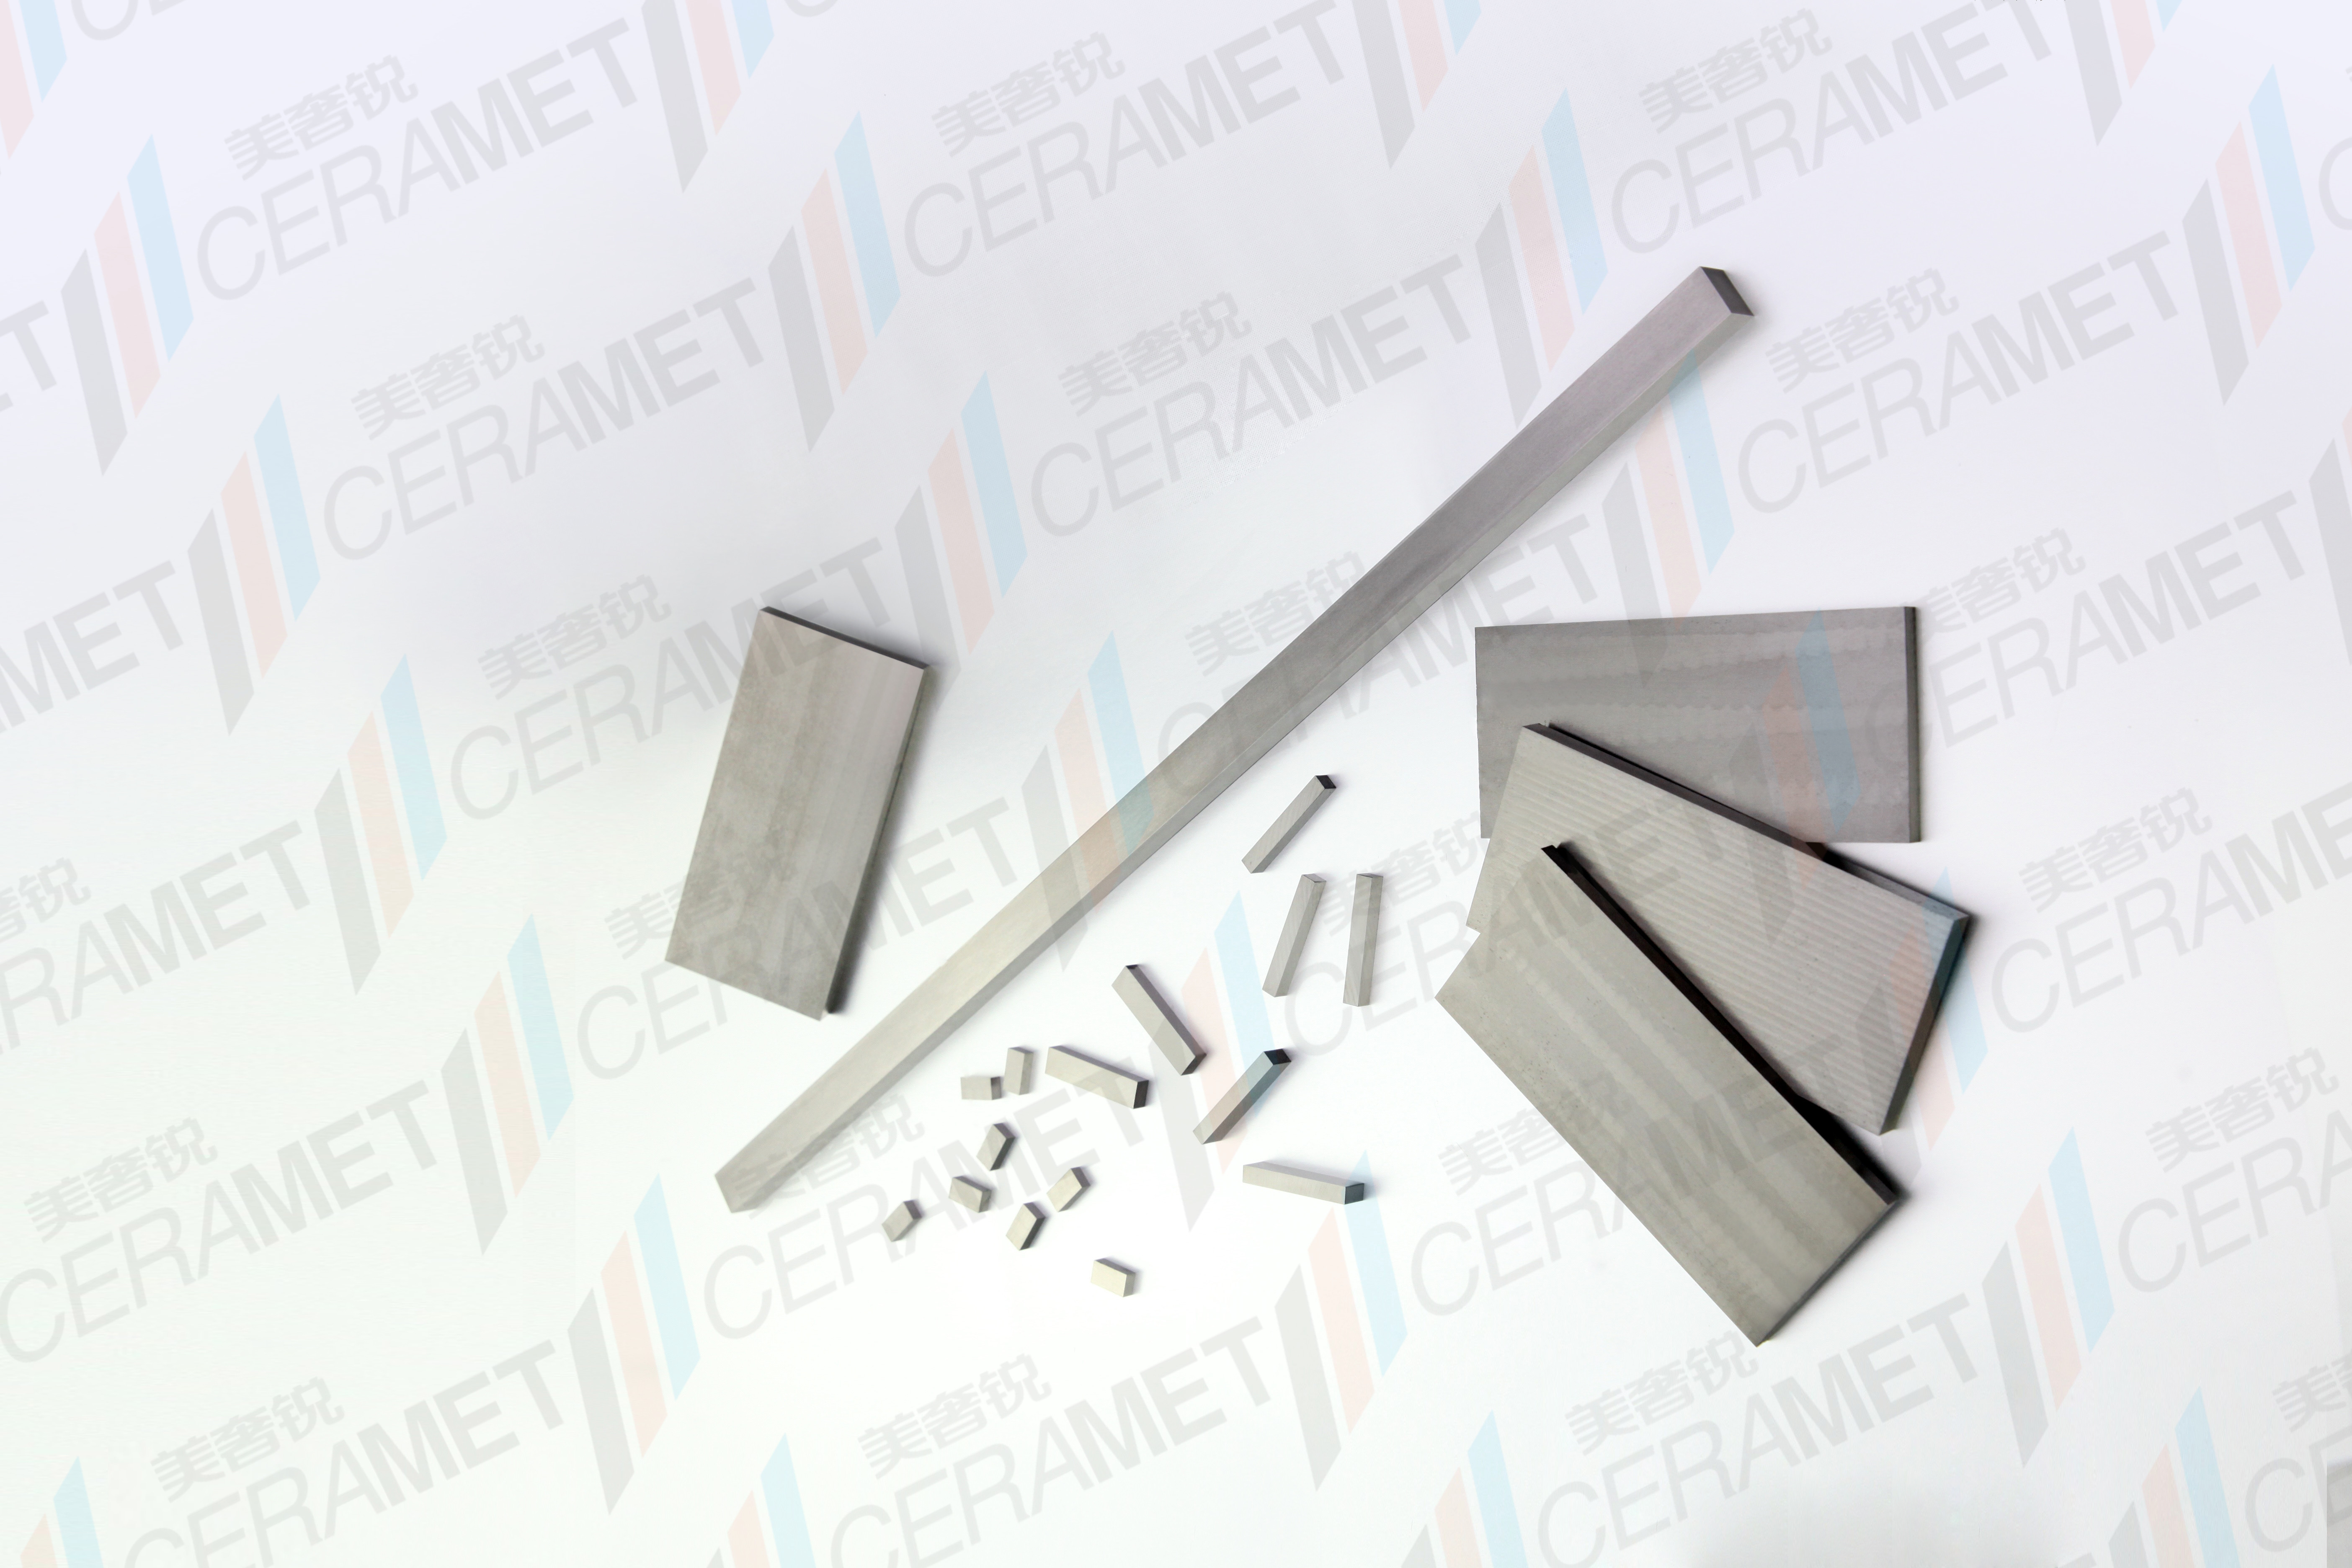 High Performance Silver Cermet Cutting Tools Cermet Tools Blanks Abrasion Resistance